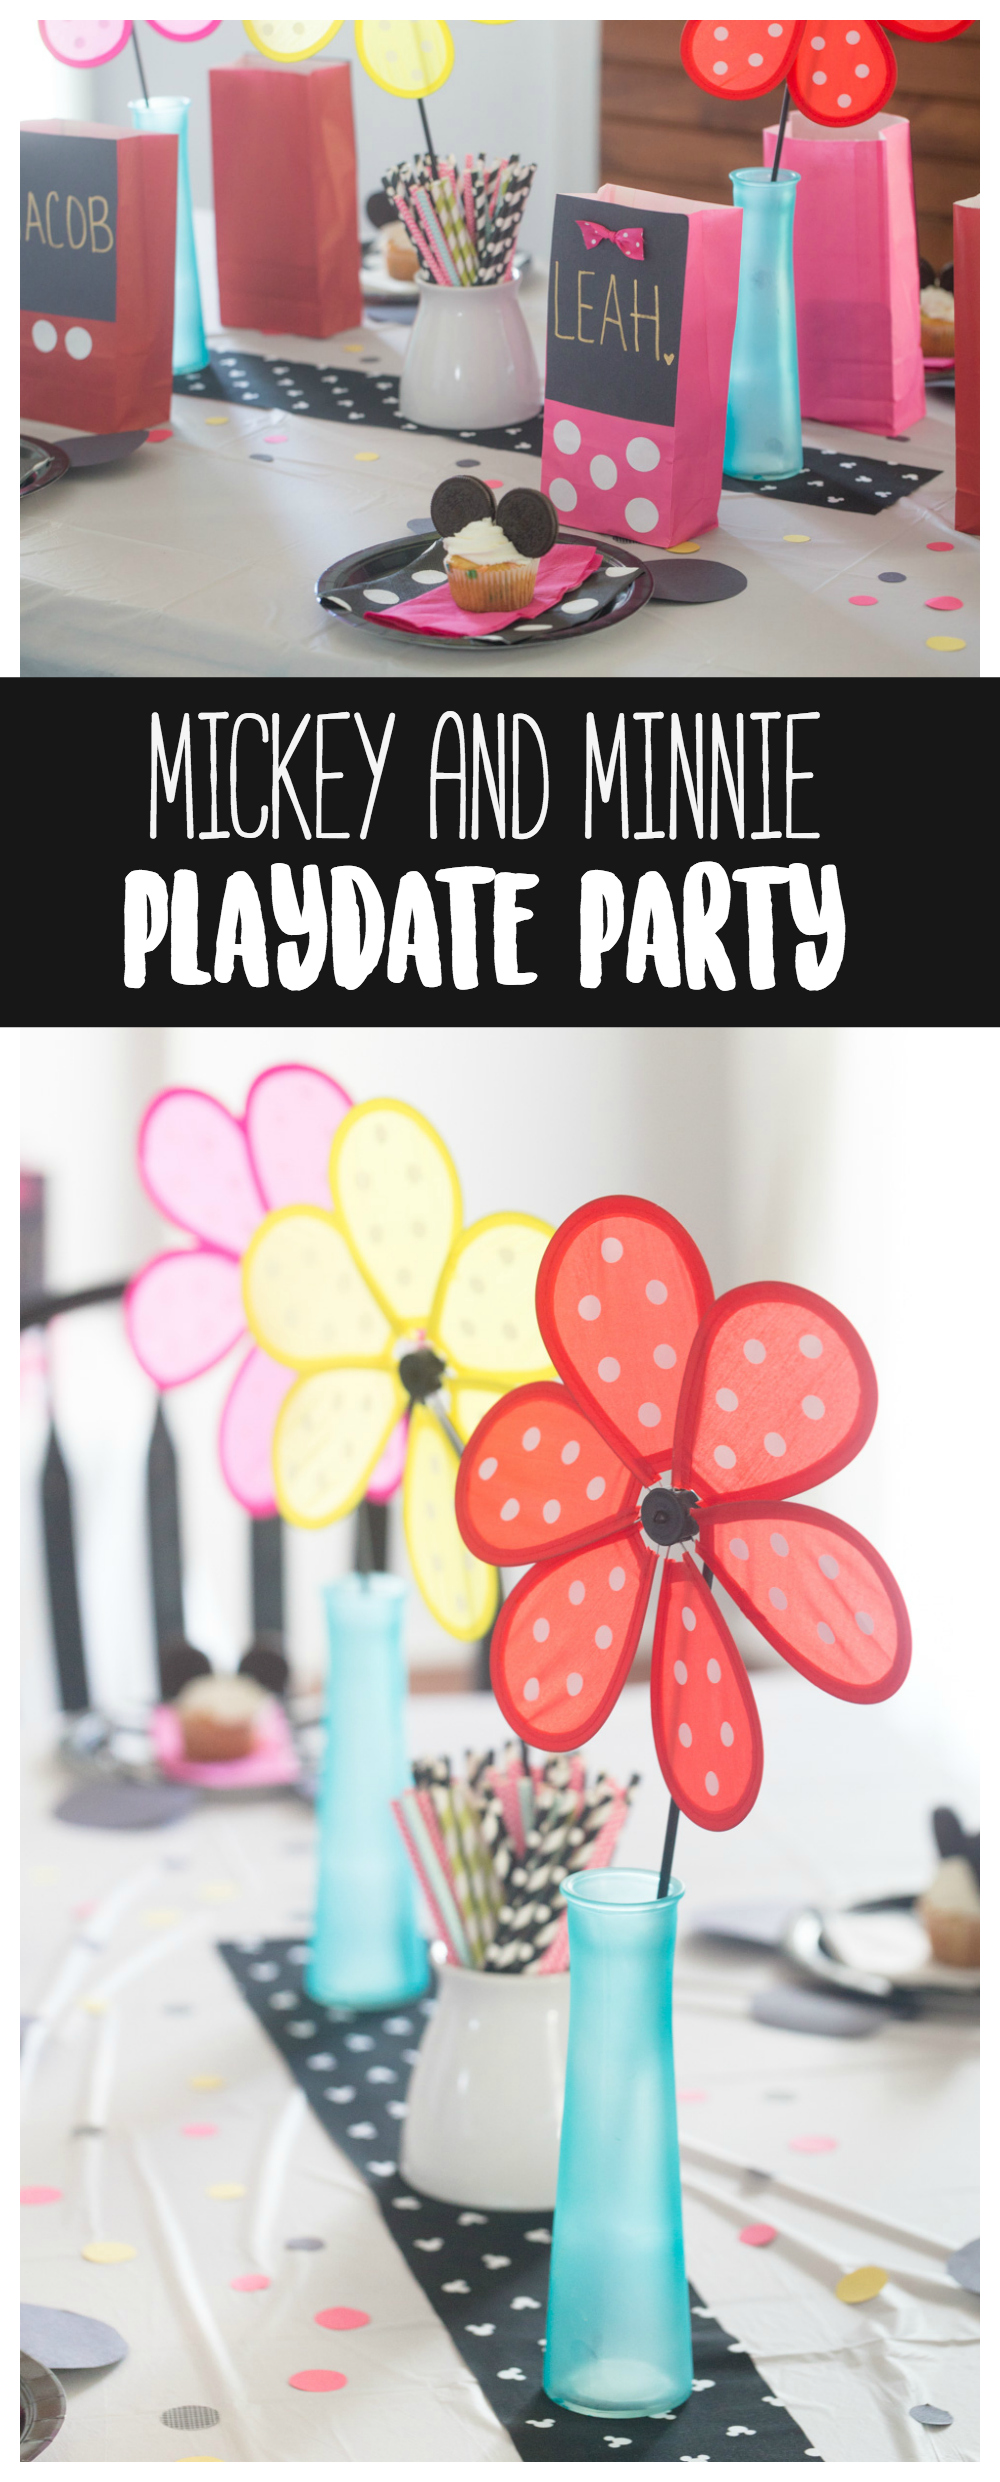 This Mickey and Minnie Playdate Party is filled with goodies, sweet treats and more!  Bring the classic Disney characters to your party!